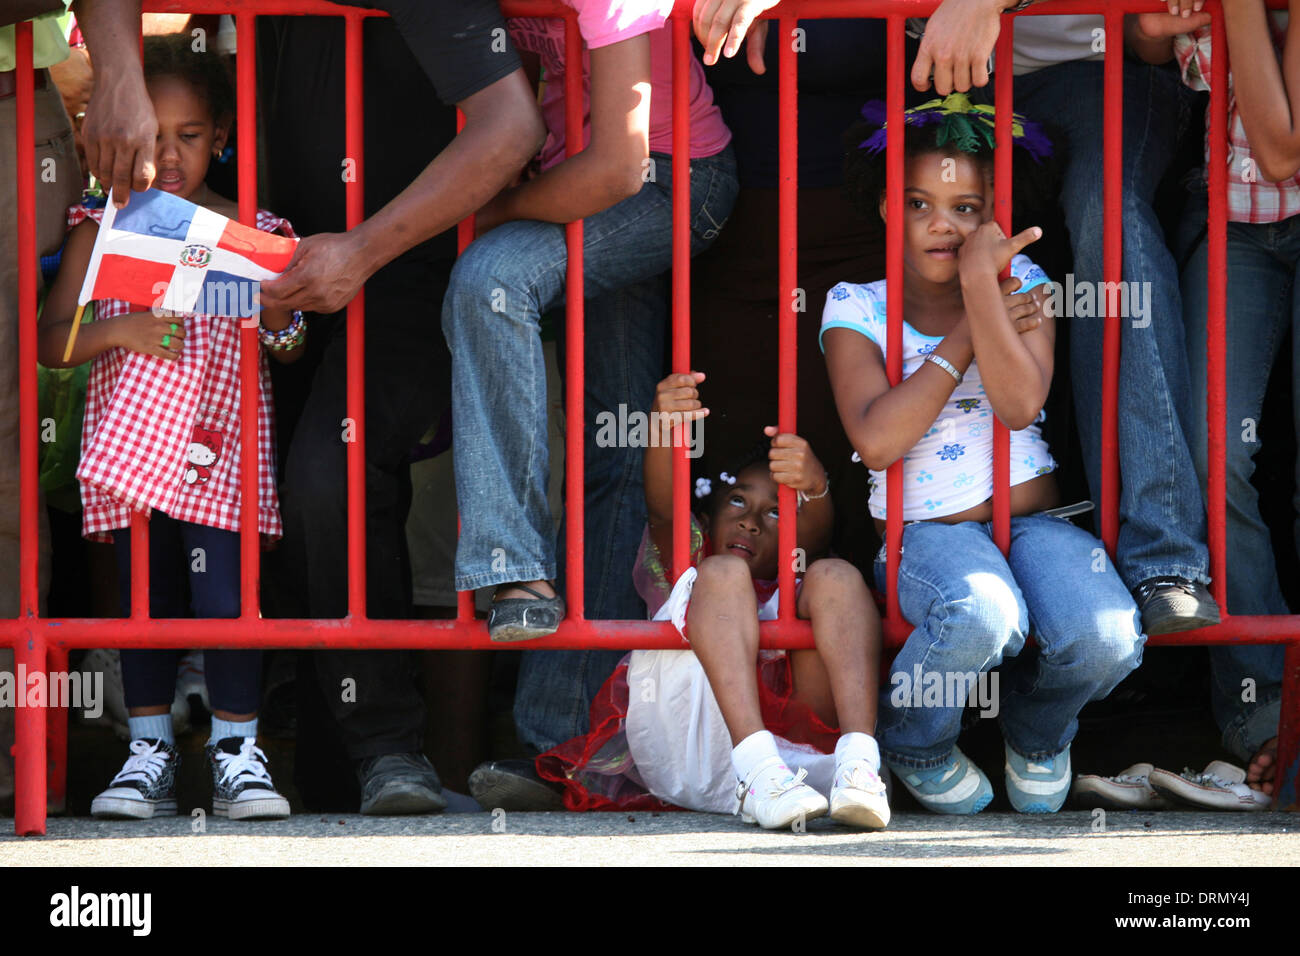 Spectaculars wait for a military parade dedicated to the Independence Day at the Malecon in Santo Domingo, Dominican Republic. Stock Photo